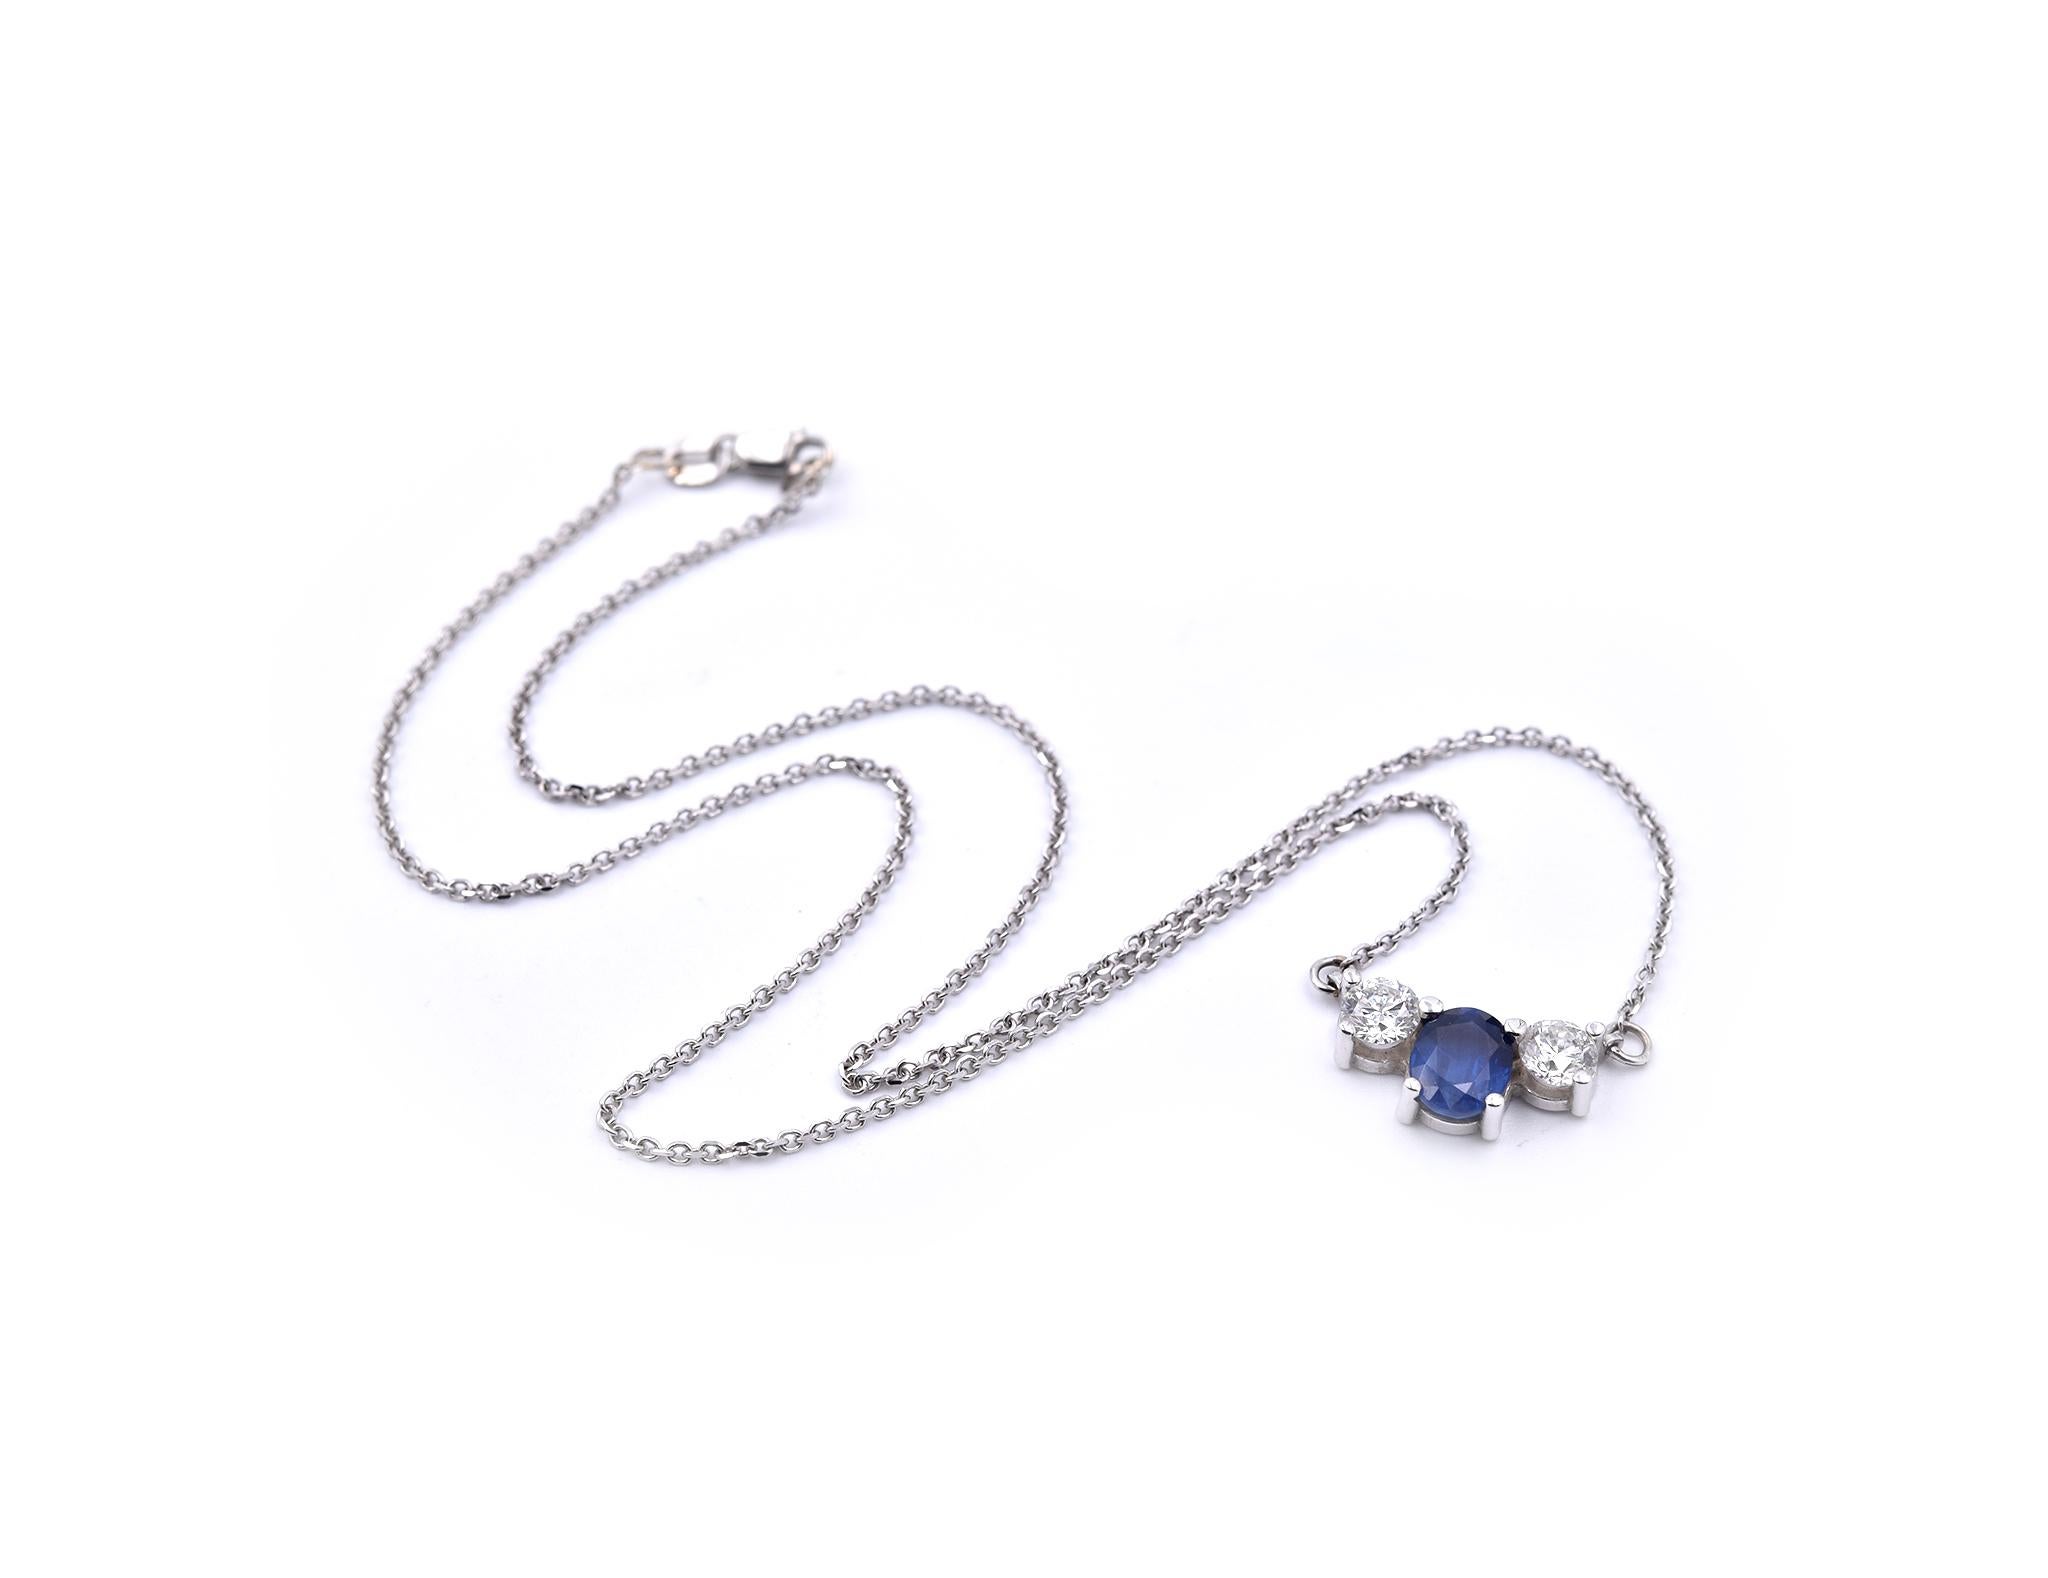 Designer: custom design
Material: 14k White Gold
Sapphire: 1 oval cut sapphire 
Diamonds: 2 round brilliant cuts = 0.80
Color: G
Clarity: VS2-SI1
Dimensions: ﻿necklace measures 15-inches in length
Weight: 3.60 grams